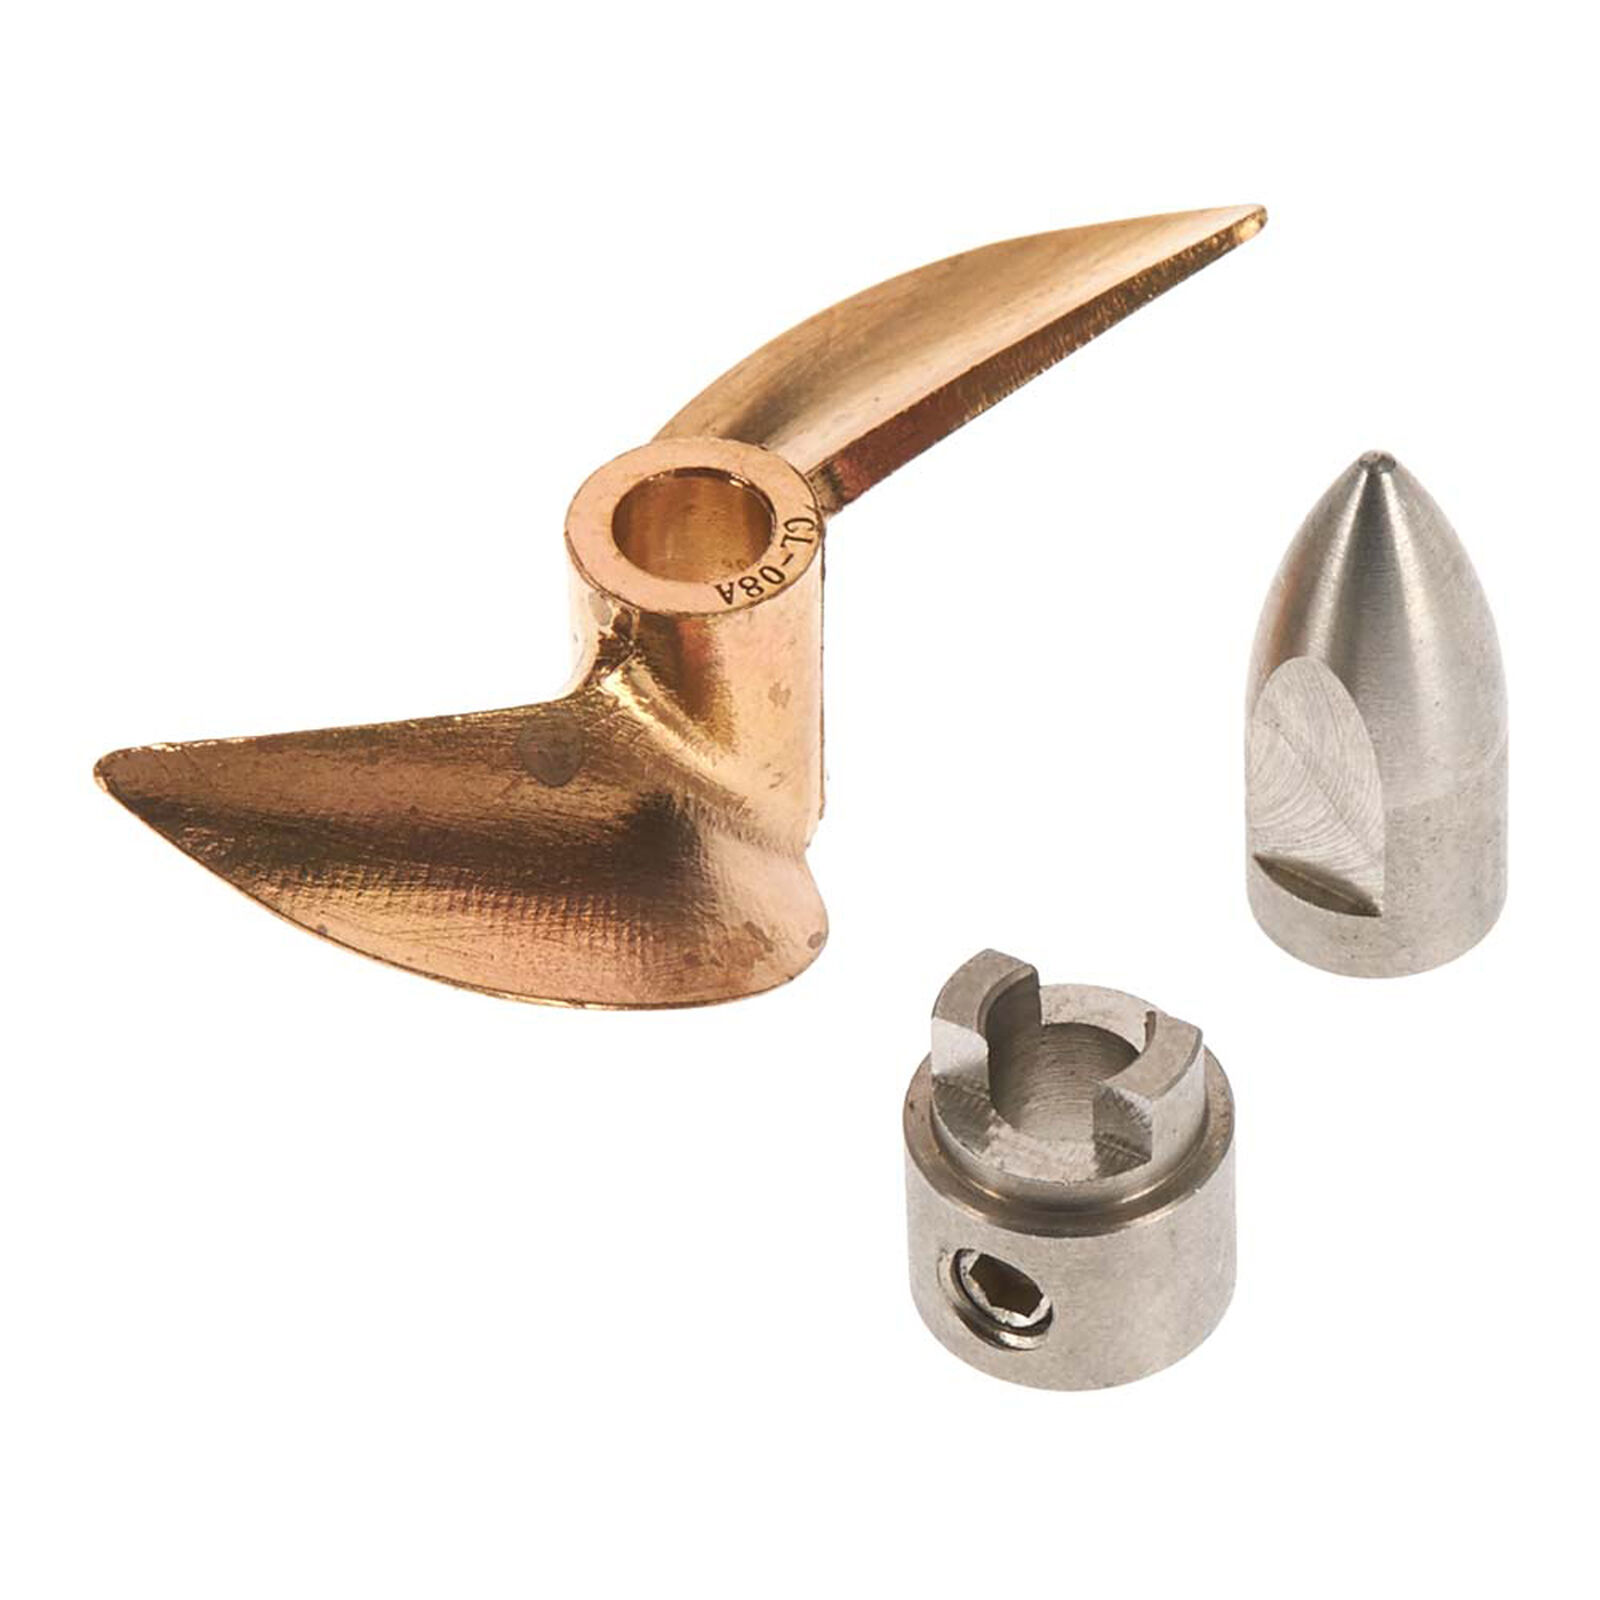 Brass Prop Set with Bullet Nut & Drive Dog: Traxxas M41, Spartan